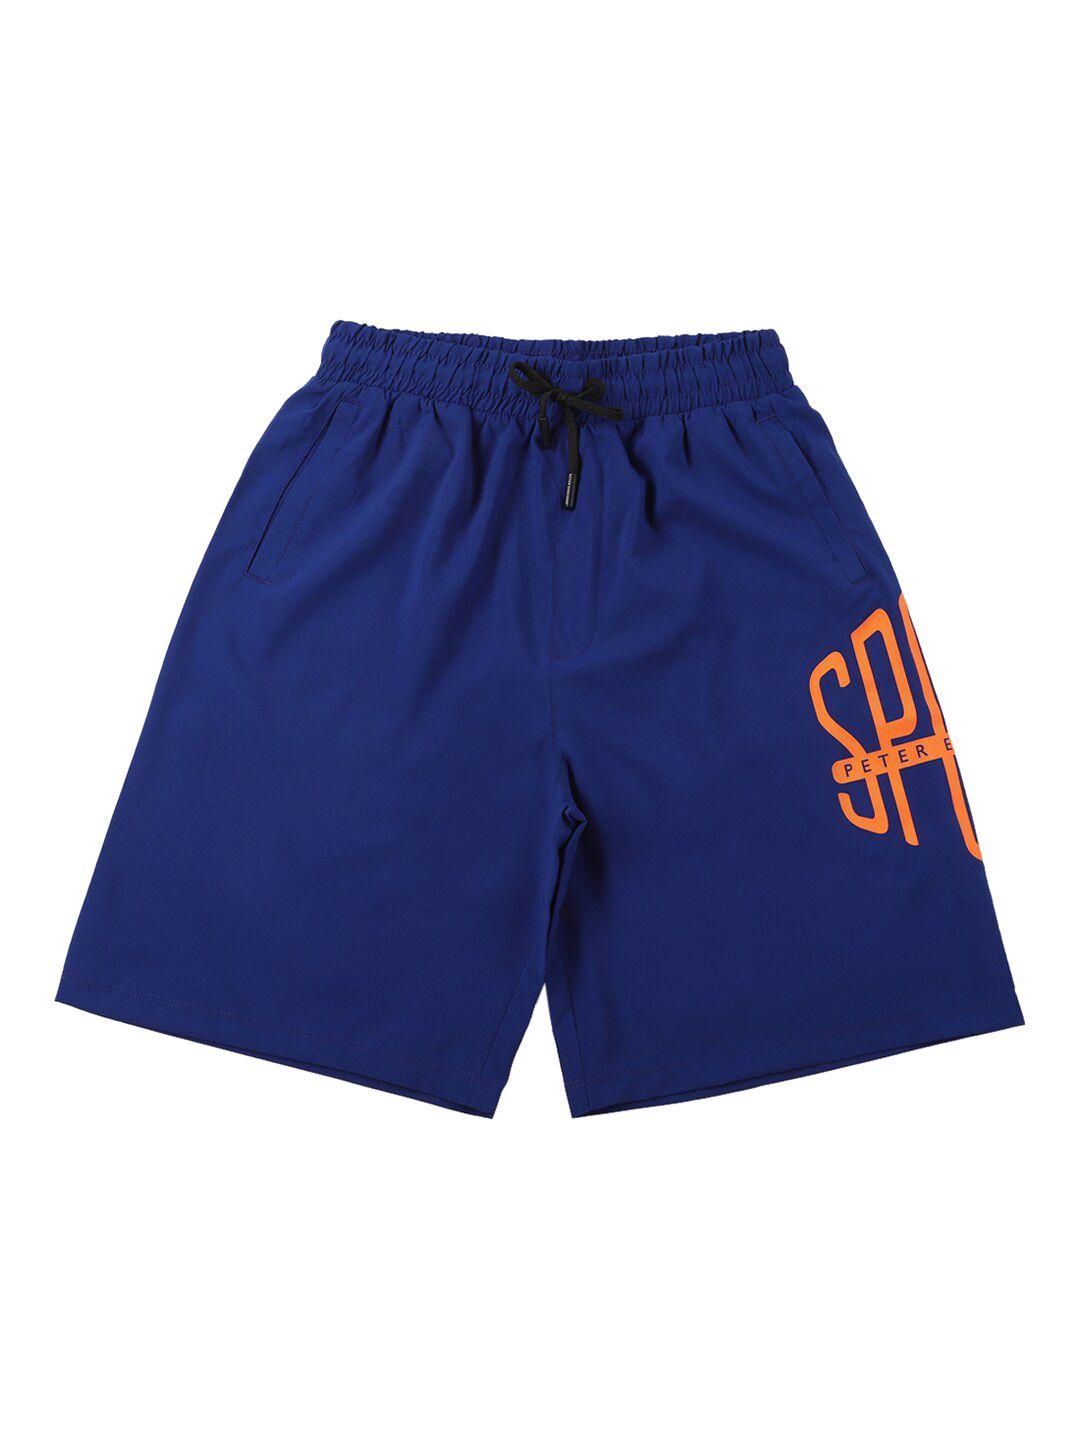 peter england boys blue typography cotton shorts